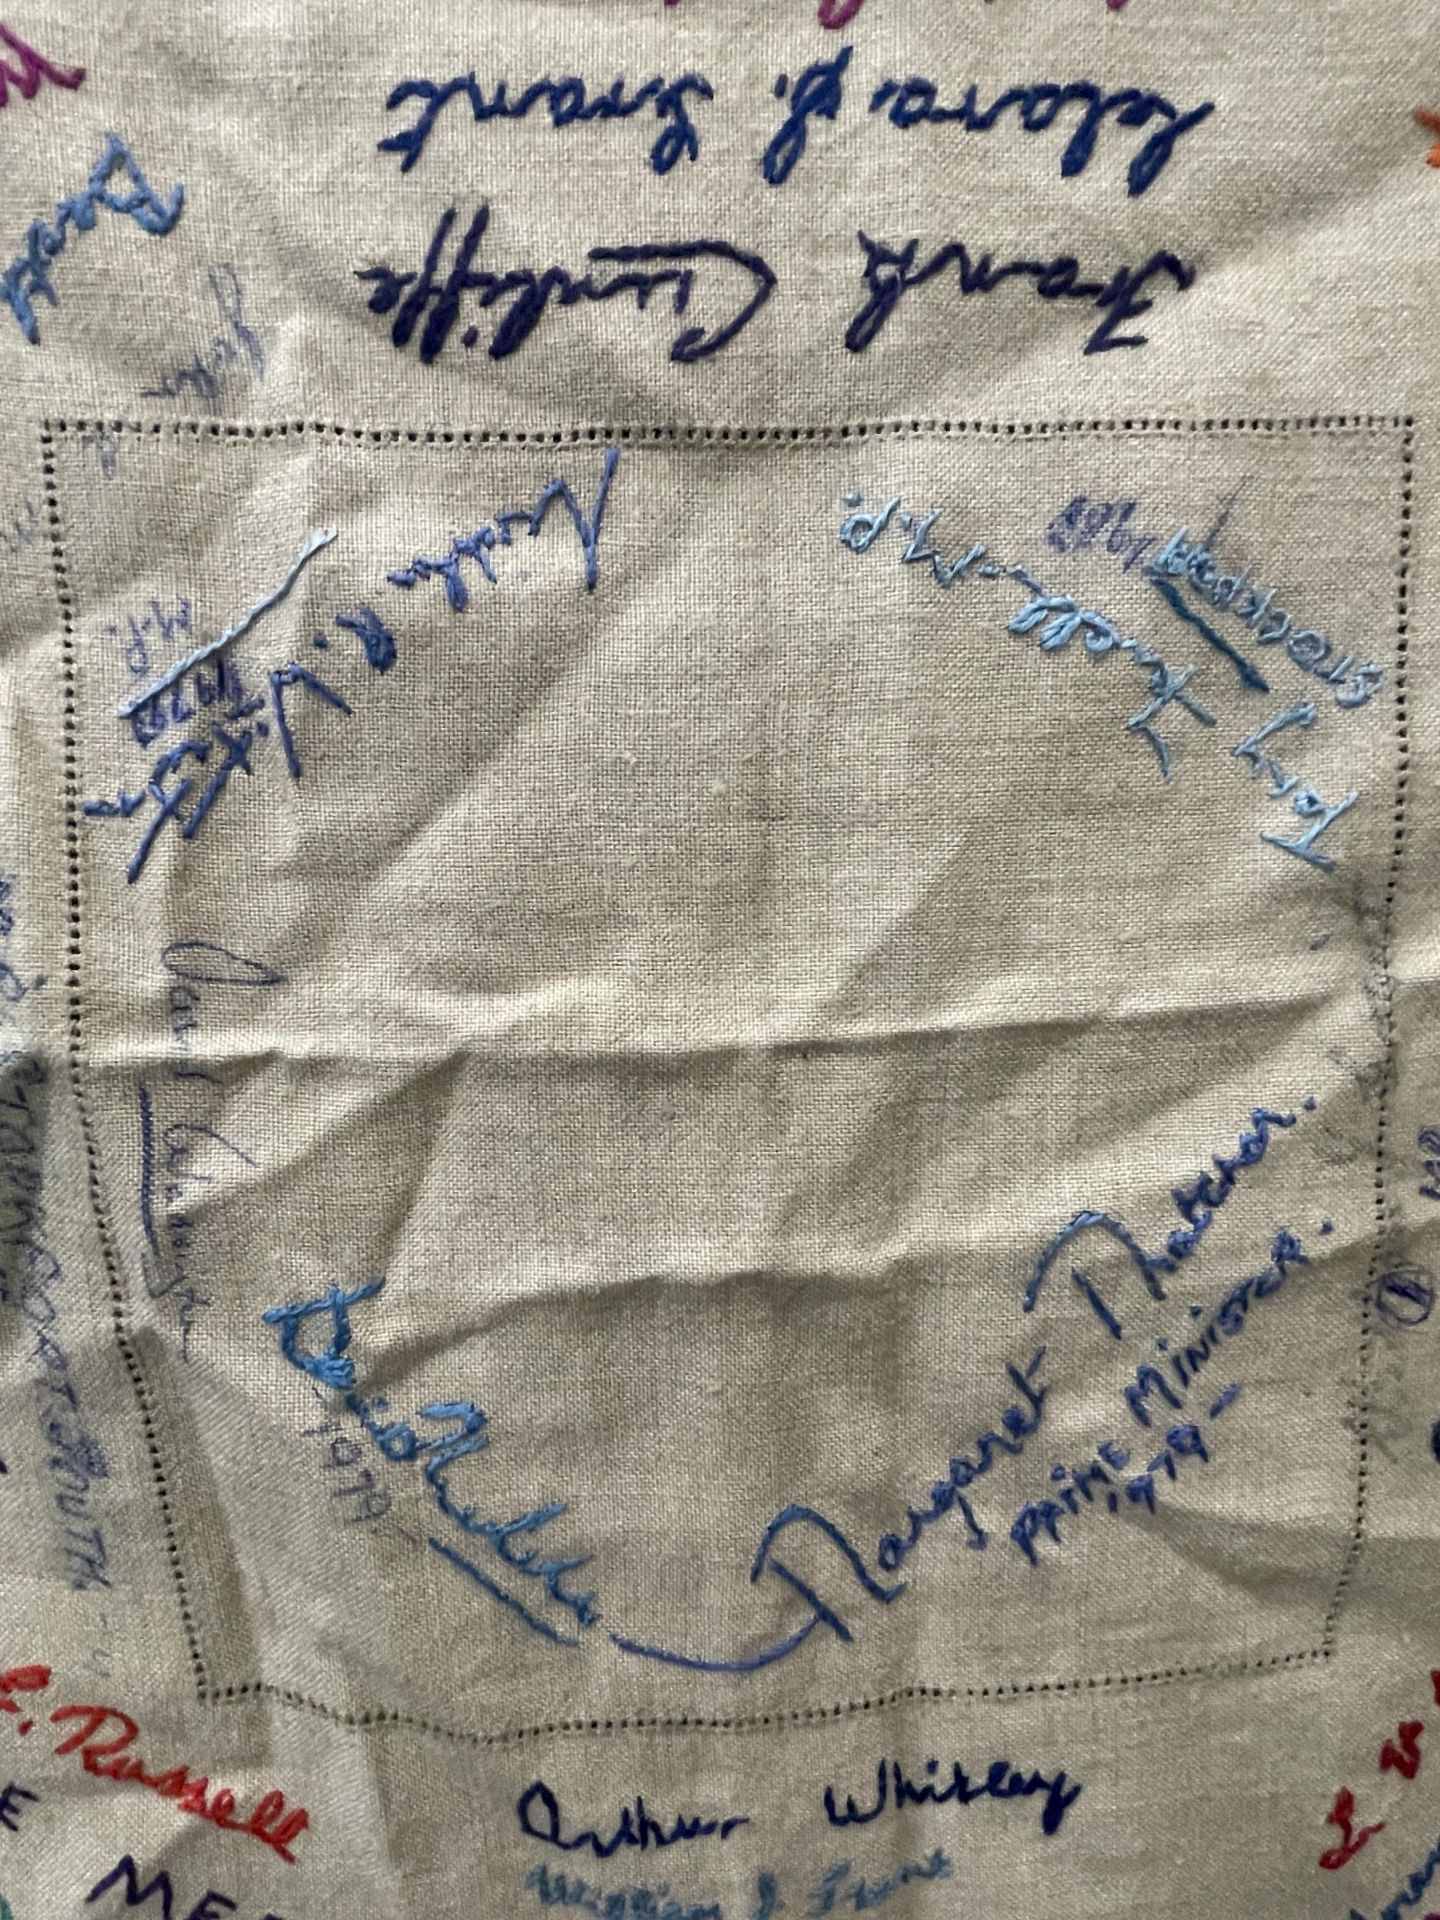 A LARGE VINTAGE CLOTH WITH SIGNATURES AND EMBROIDERED NAMES INCLUDING MARGARET THATCHER - Image 9 of 9